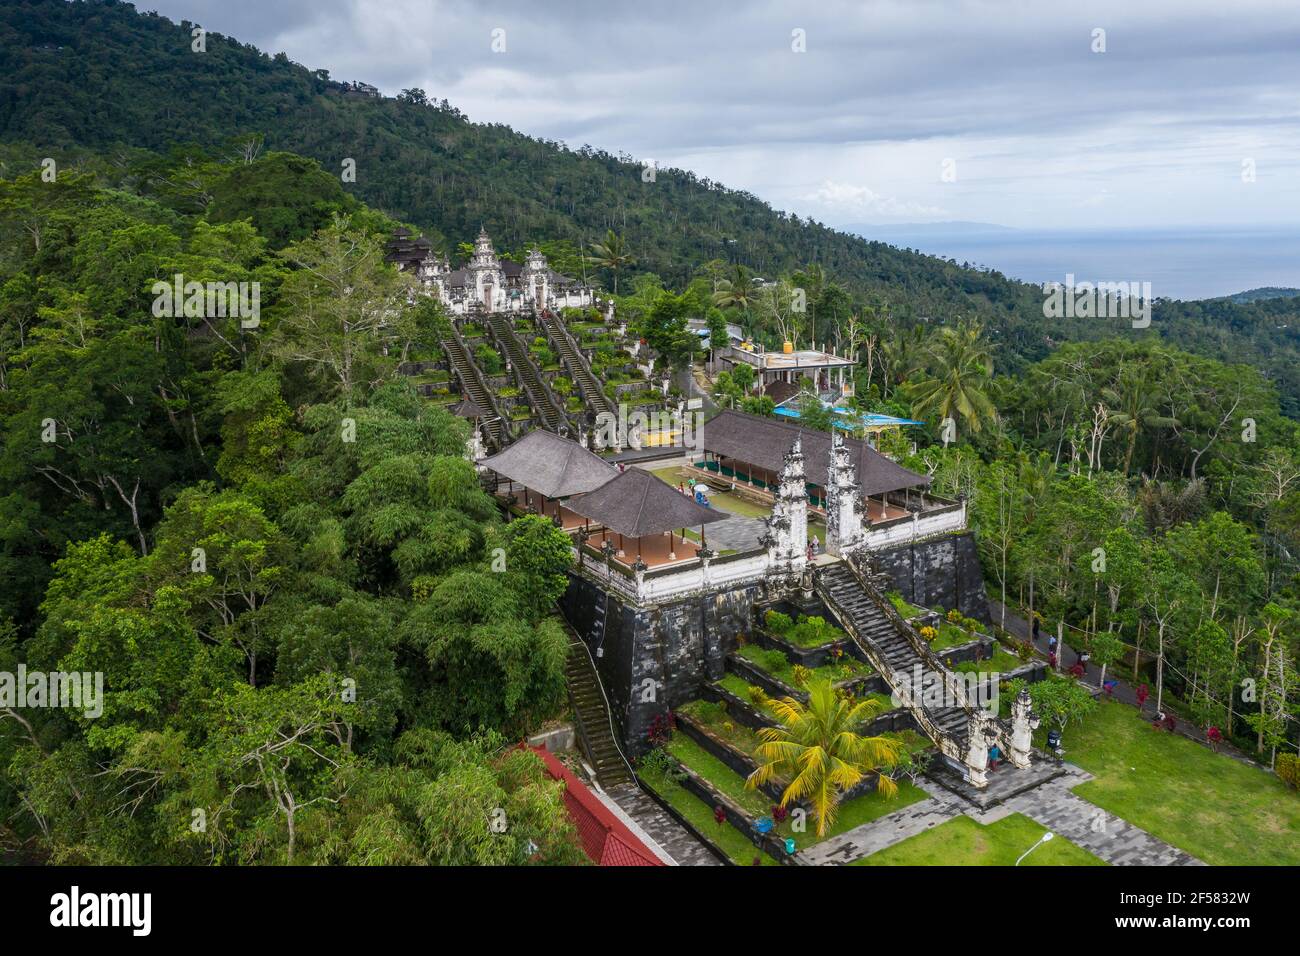 Aerial viewf of the Lempuyang temple, a traditional Balinese Hindu temple in Bali, Indonesia Stock Photo